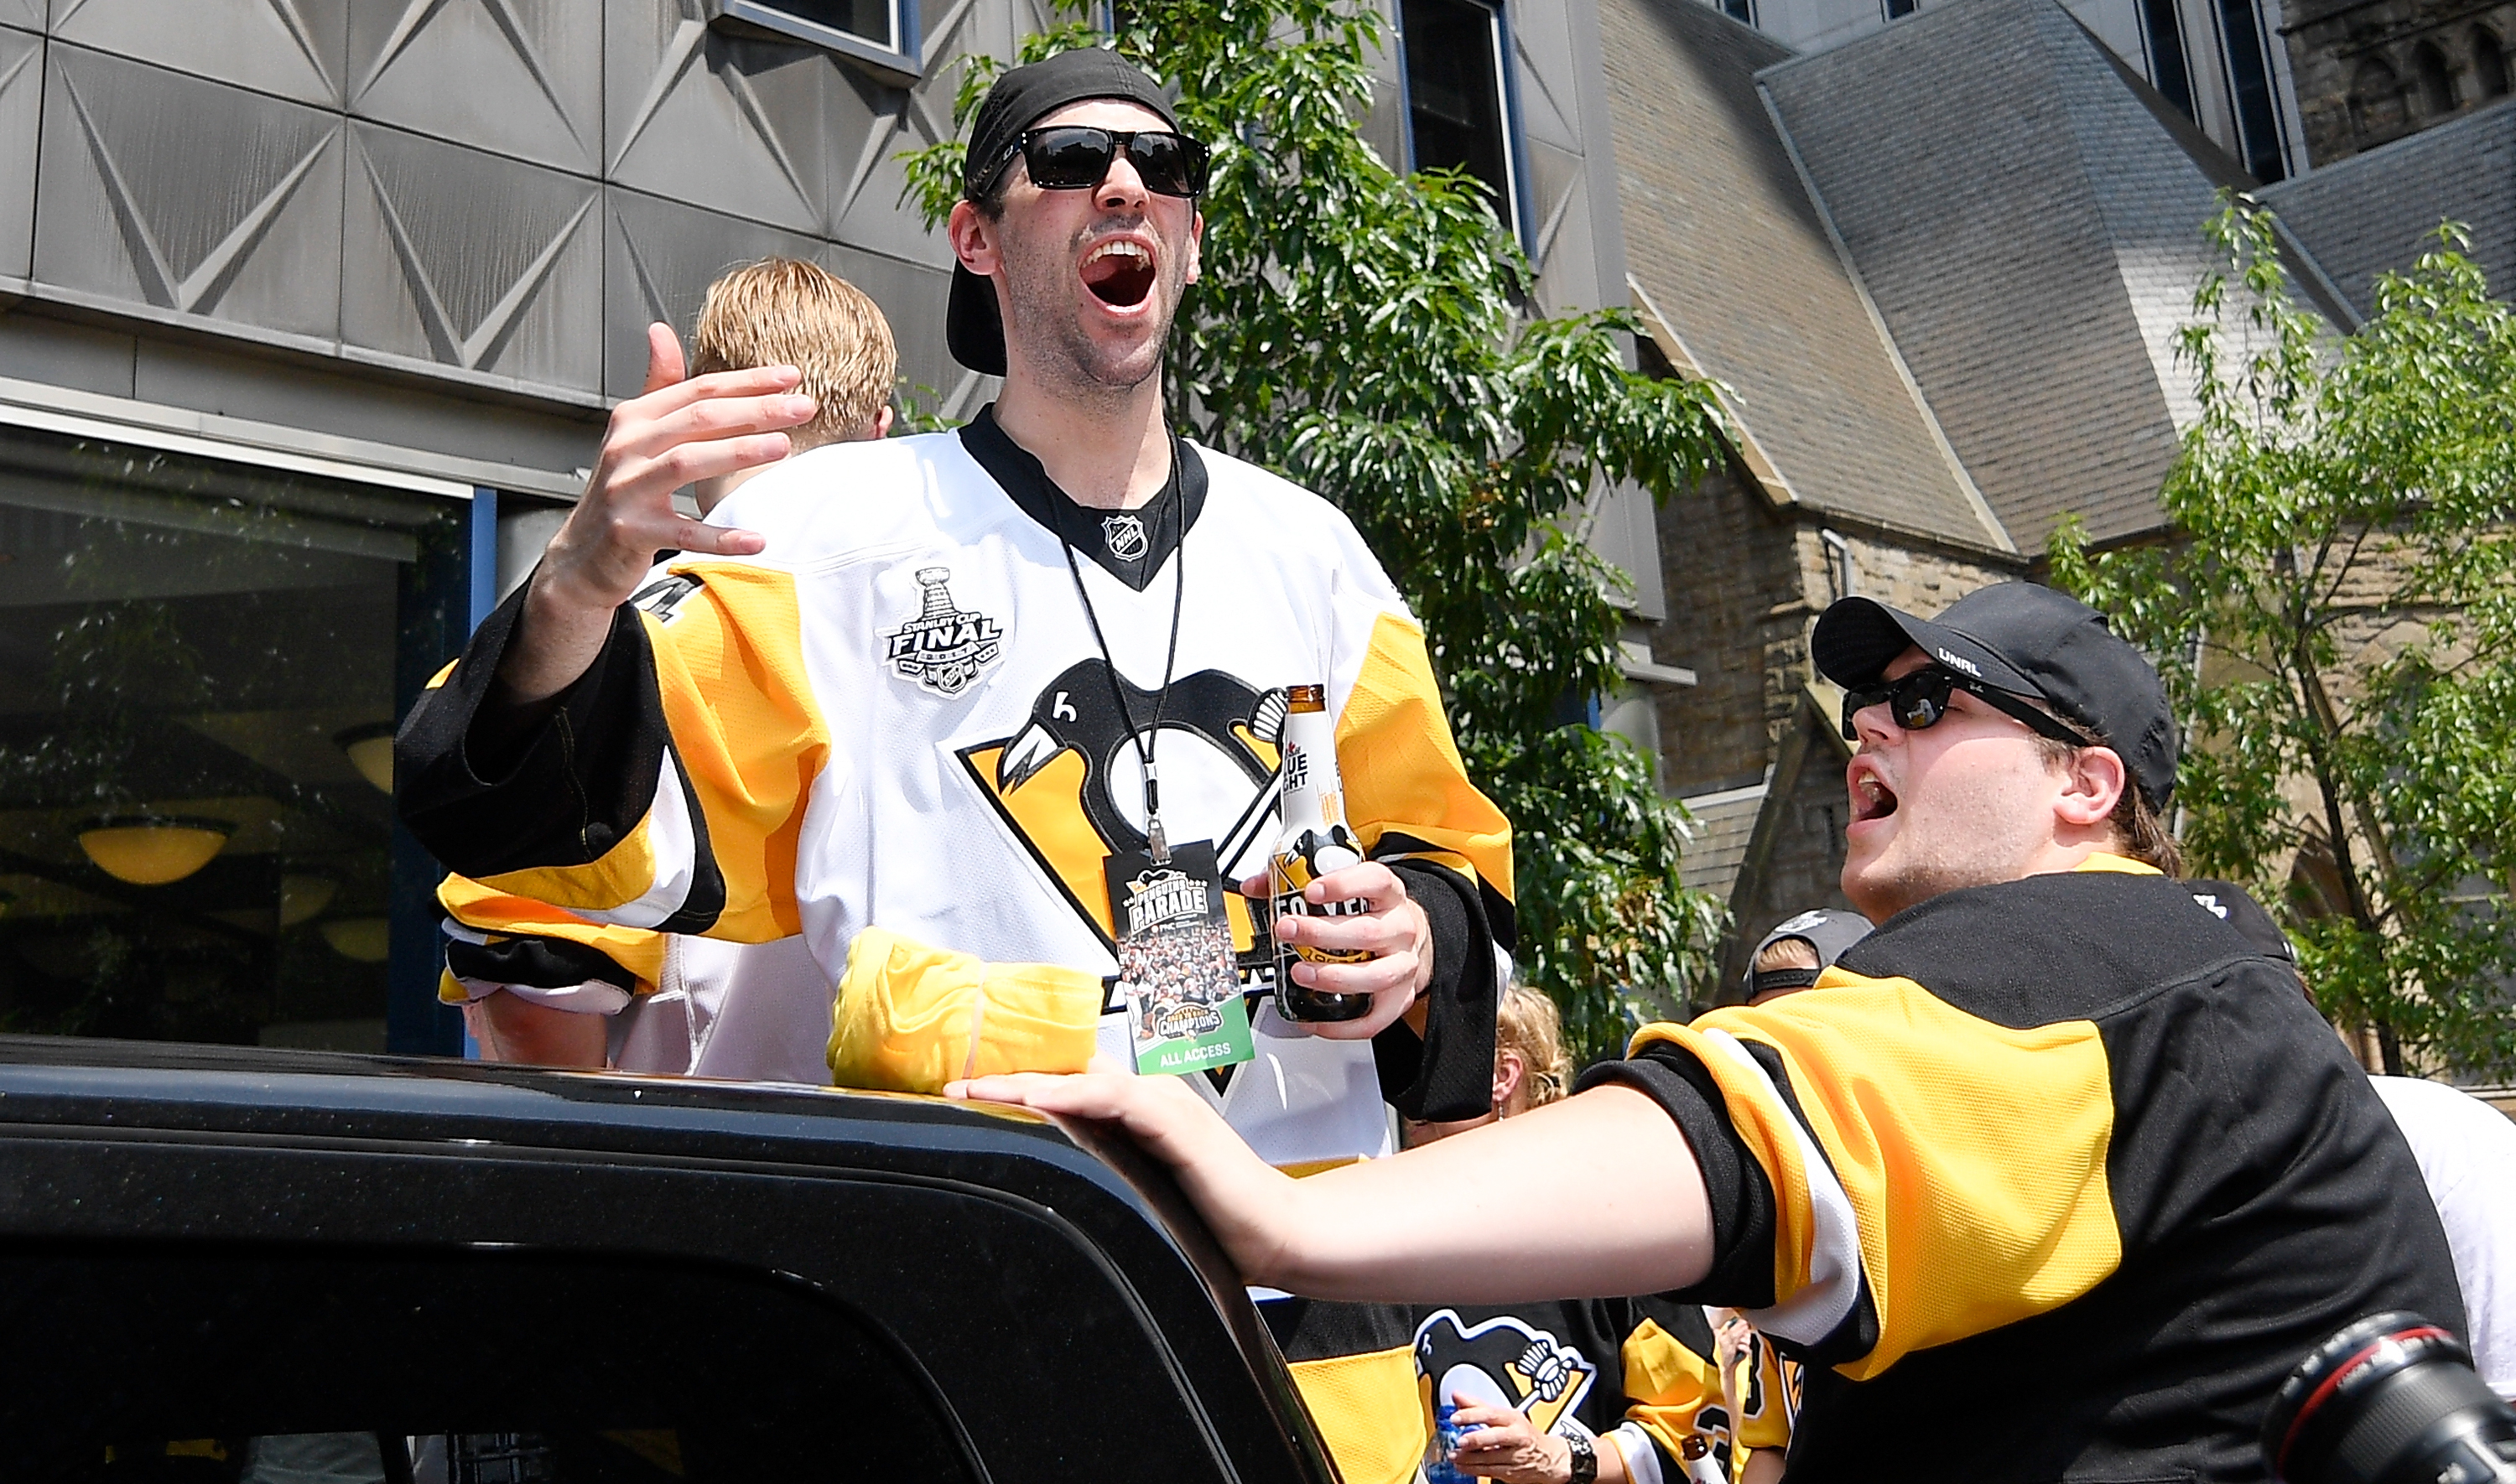 Huge victory parade for Pittsburgh Penguins' second straight